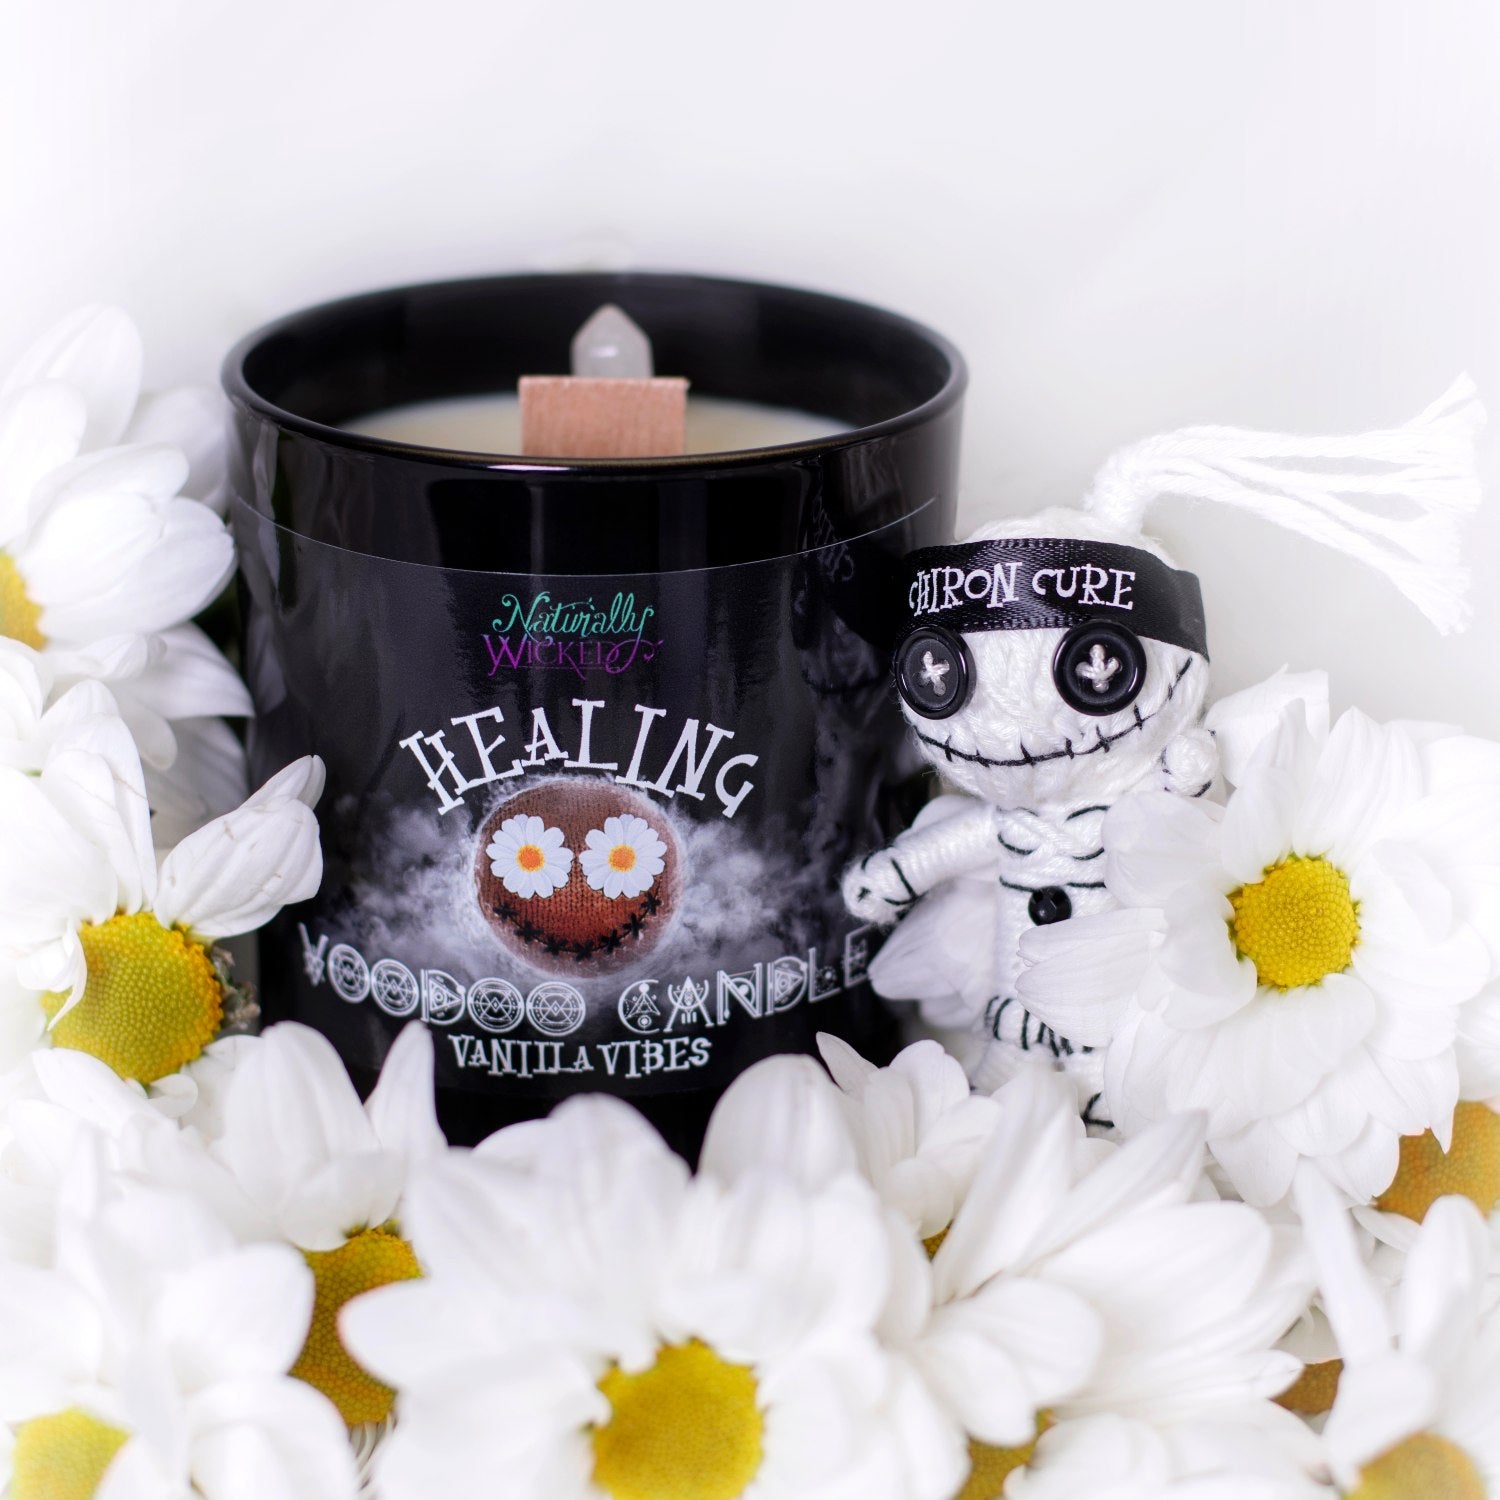 Naturally Wicked Voodoo Healing Spell Candle Entombed With Quartz Crystal Amongst Daisies & Healing Voodoo Doll